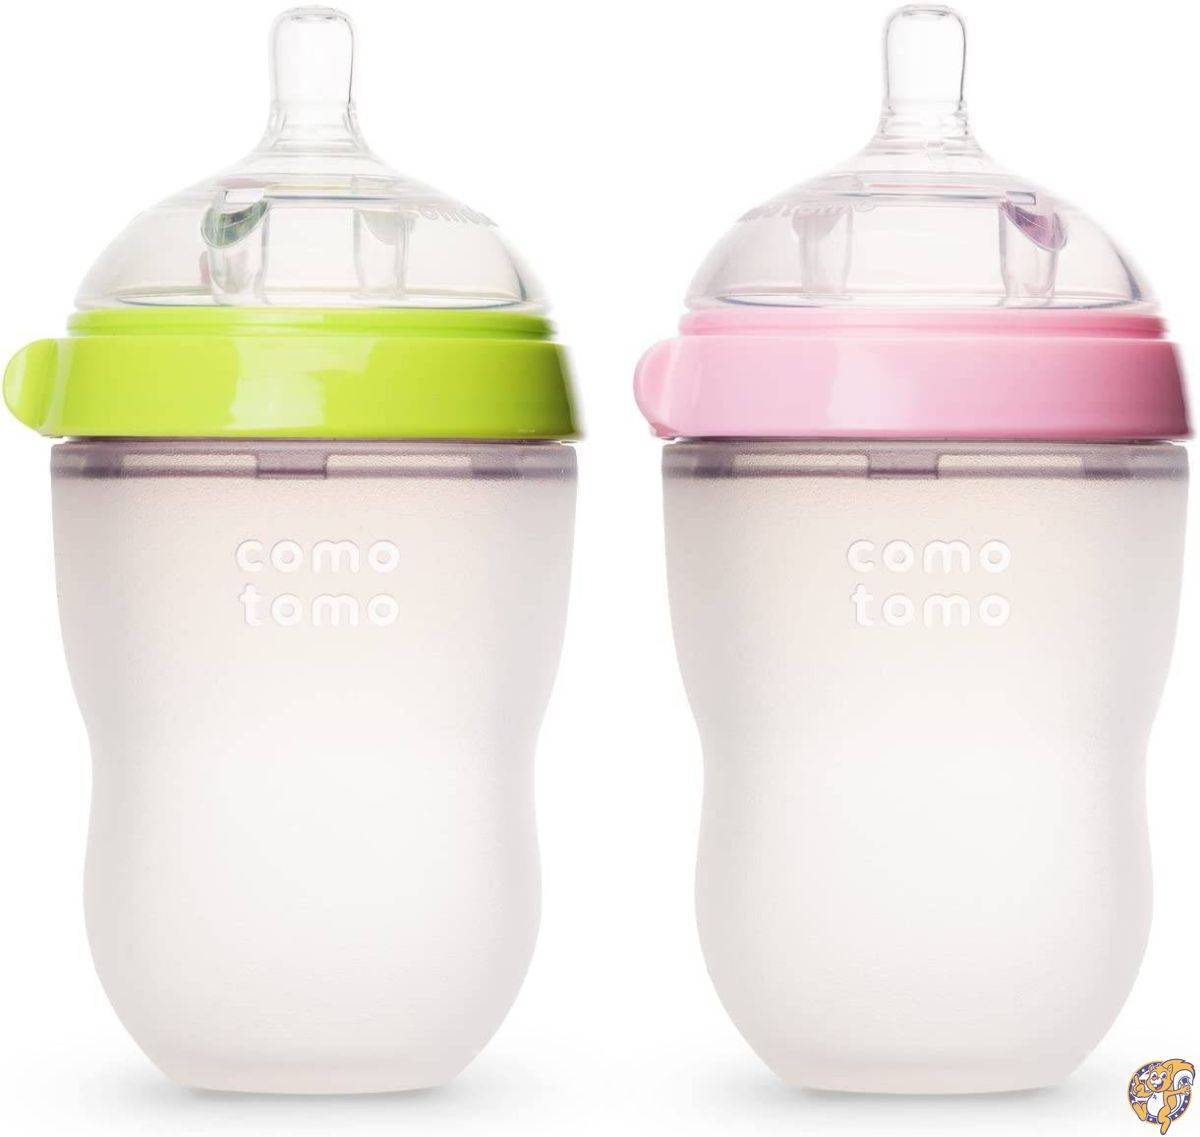 Comotomo Baby Bottle, Green/Pink, 8 Ounce, 2 Count (Discontinued by